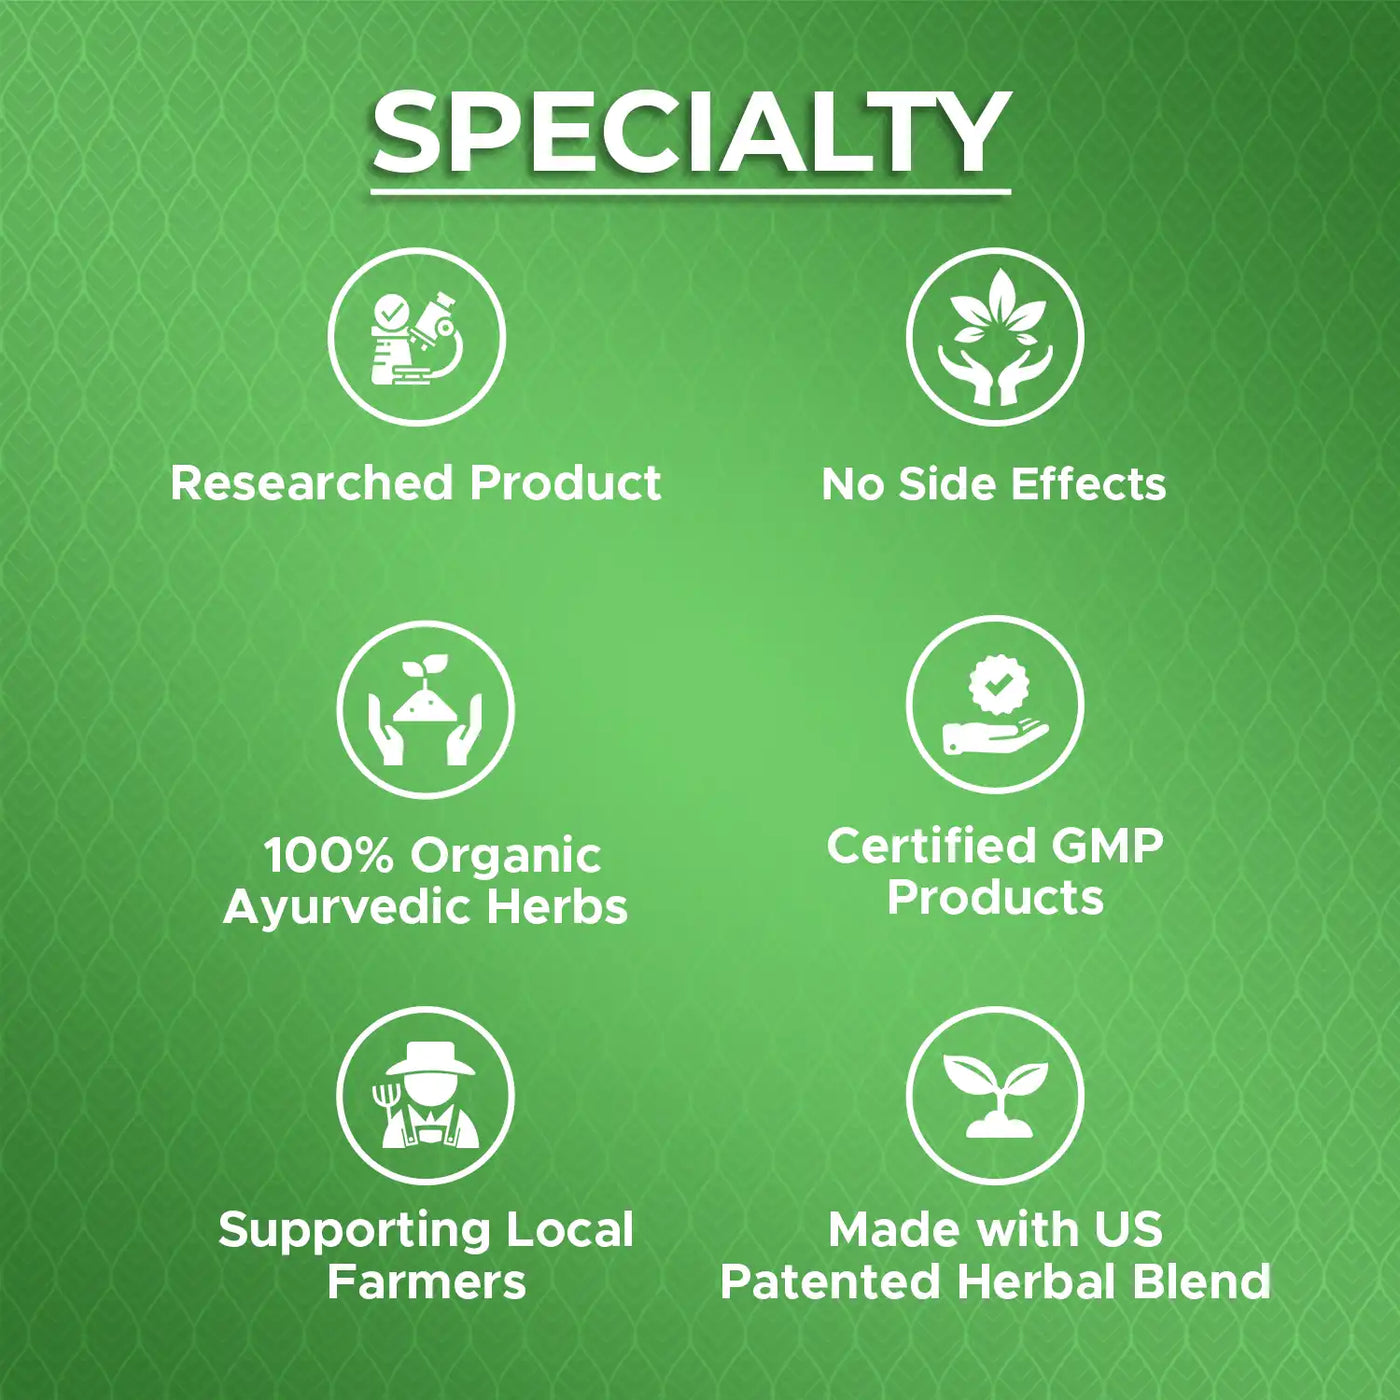 clinically researched product with no side effects, high absorption and made in certified GMP facility with organic herbs supporting local farmers.